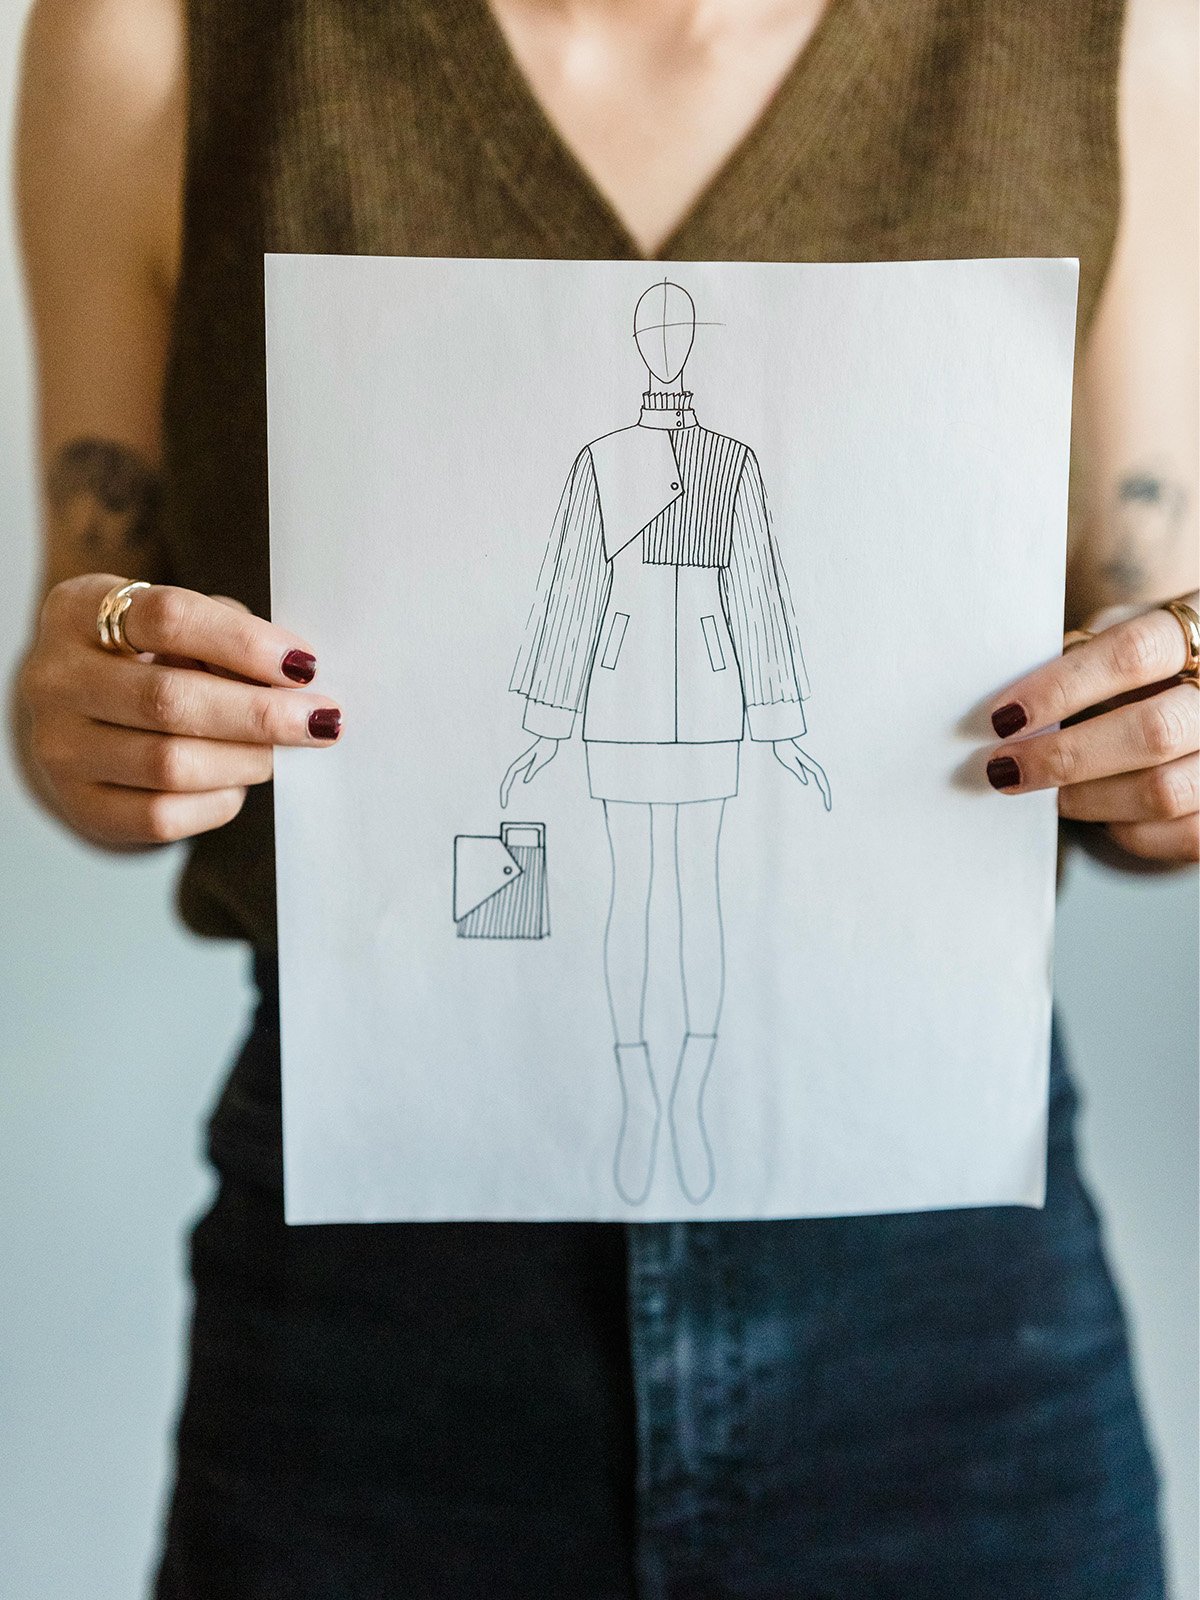 Future of the fashion industry: what will be the most in-demand figures?